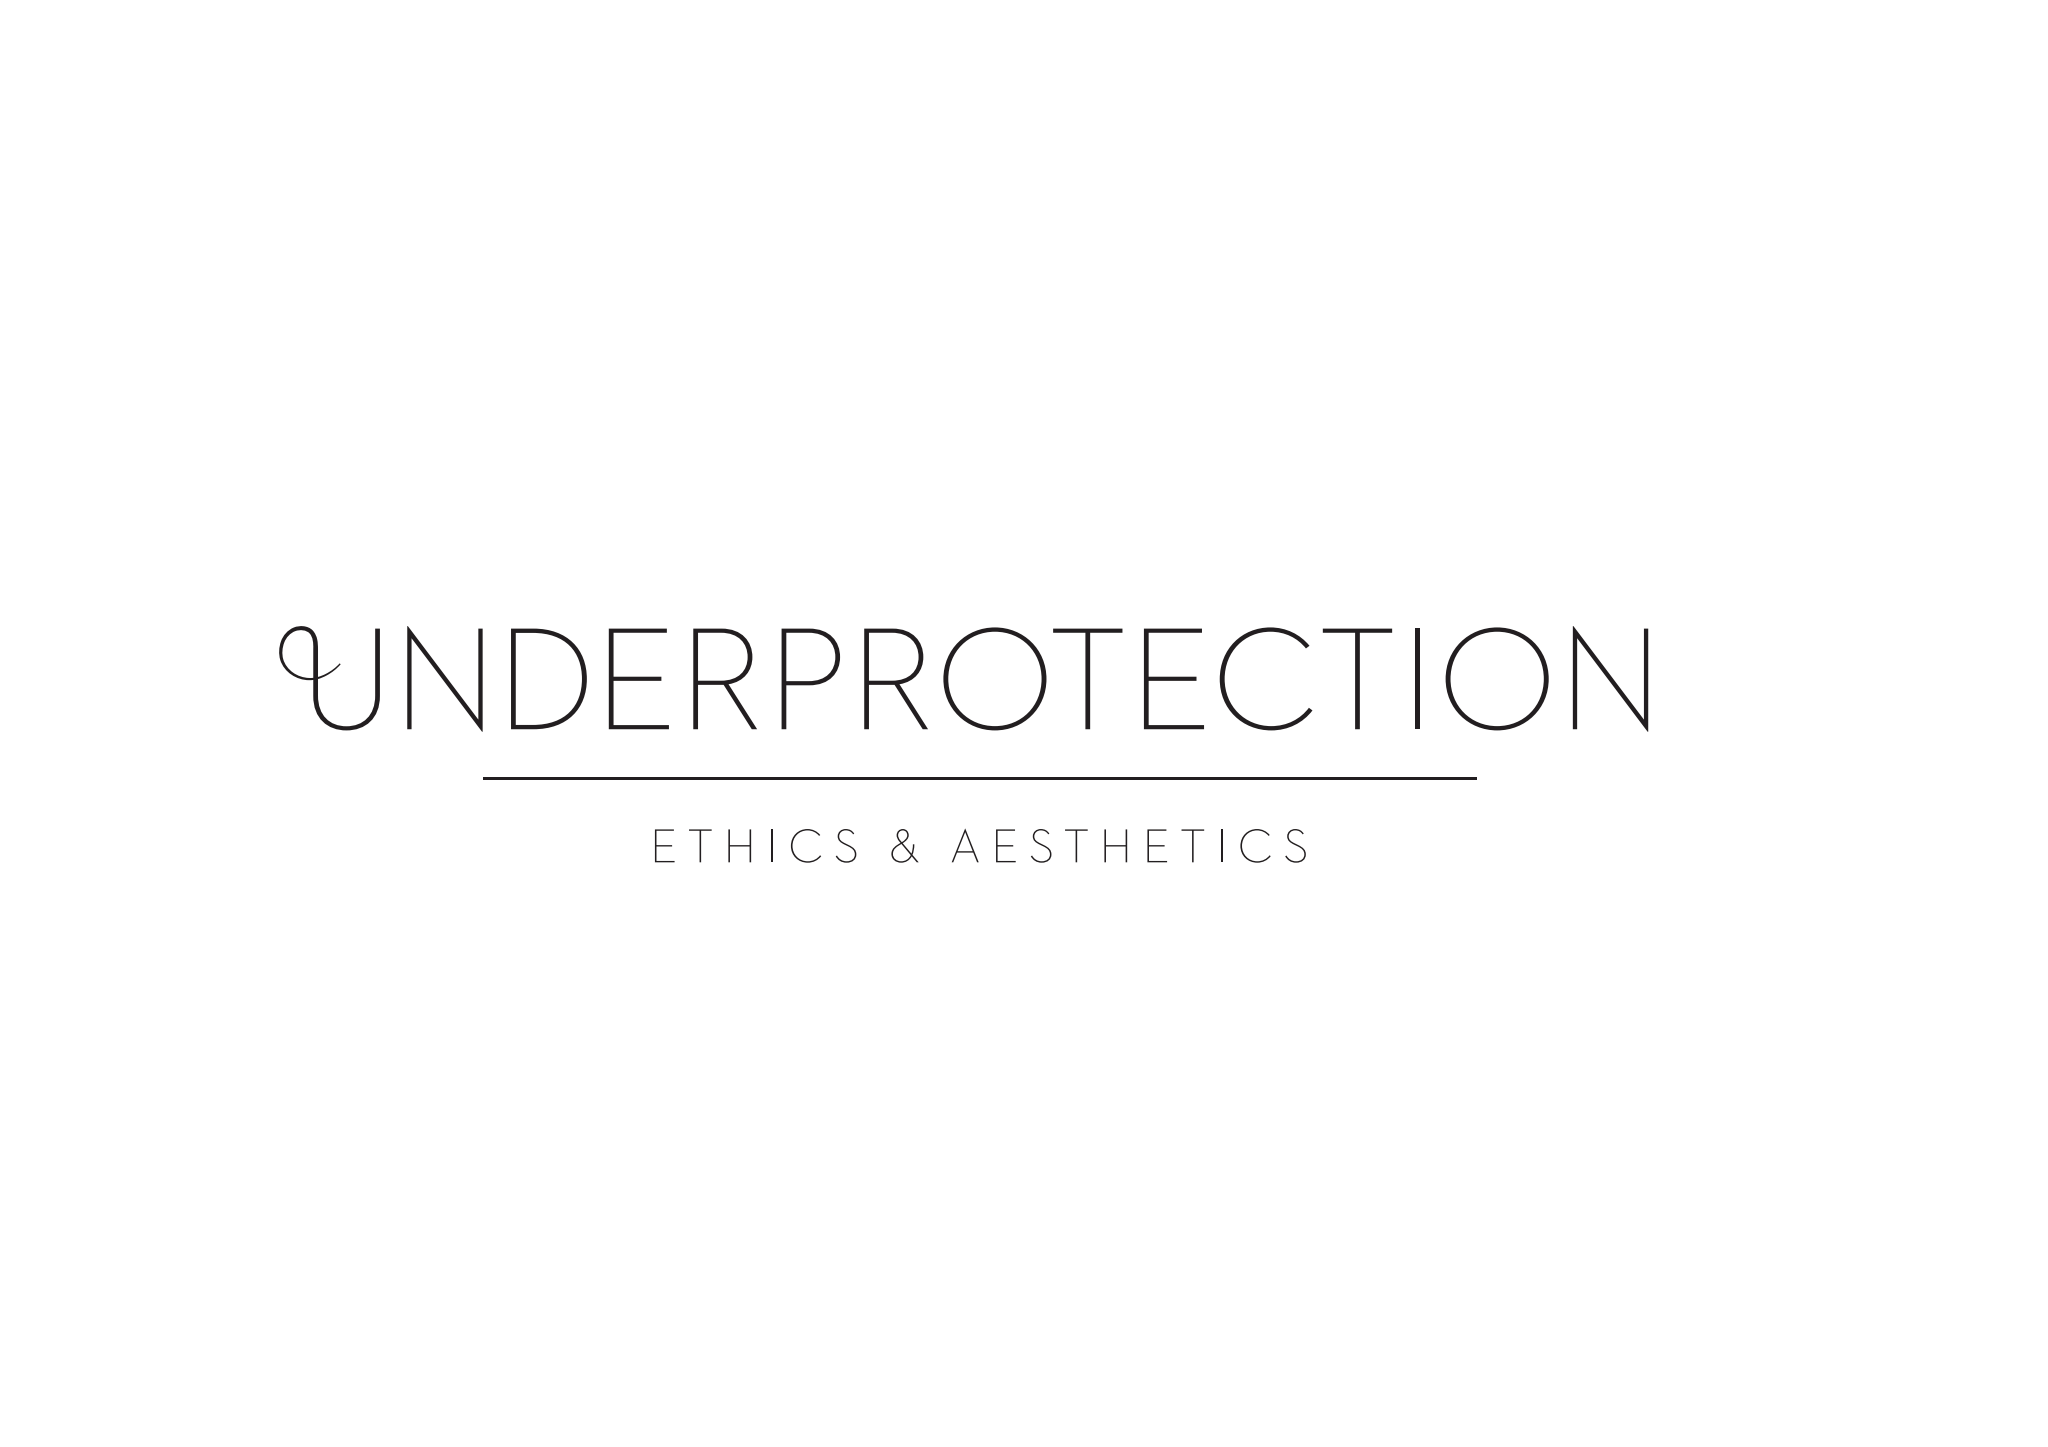 Underprotection